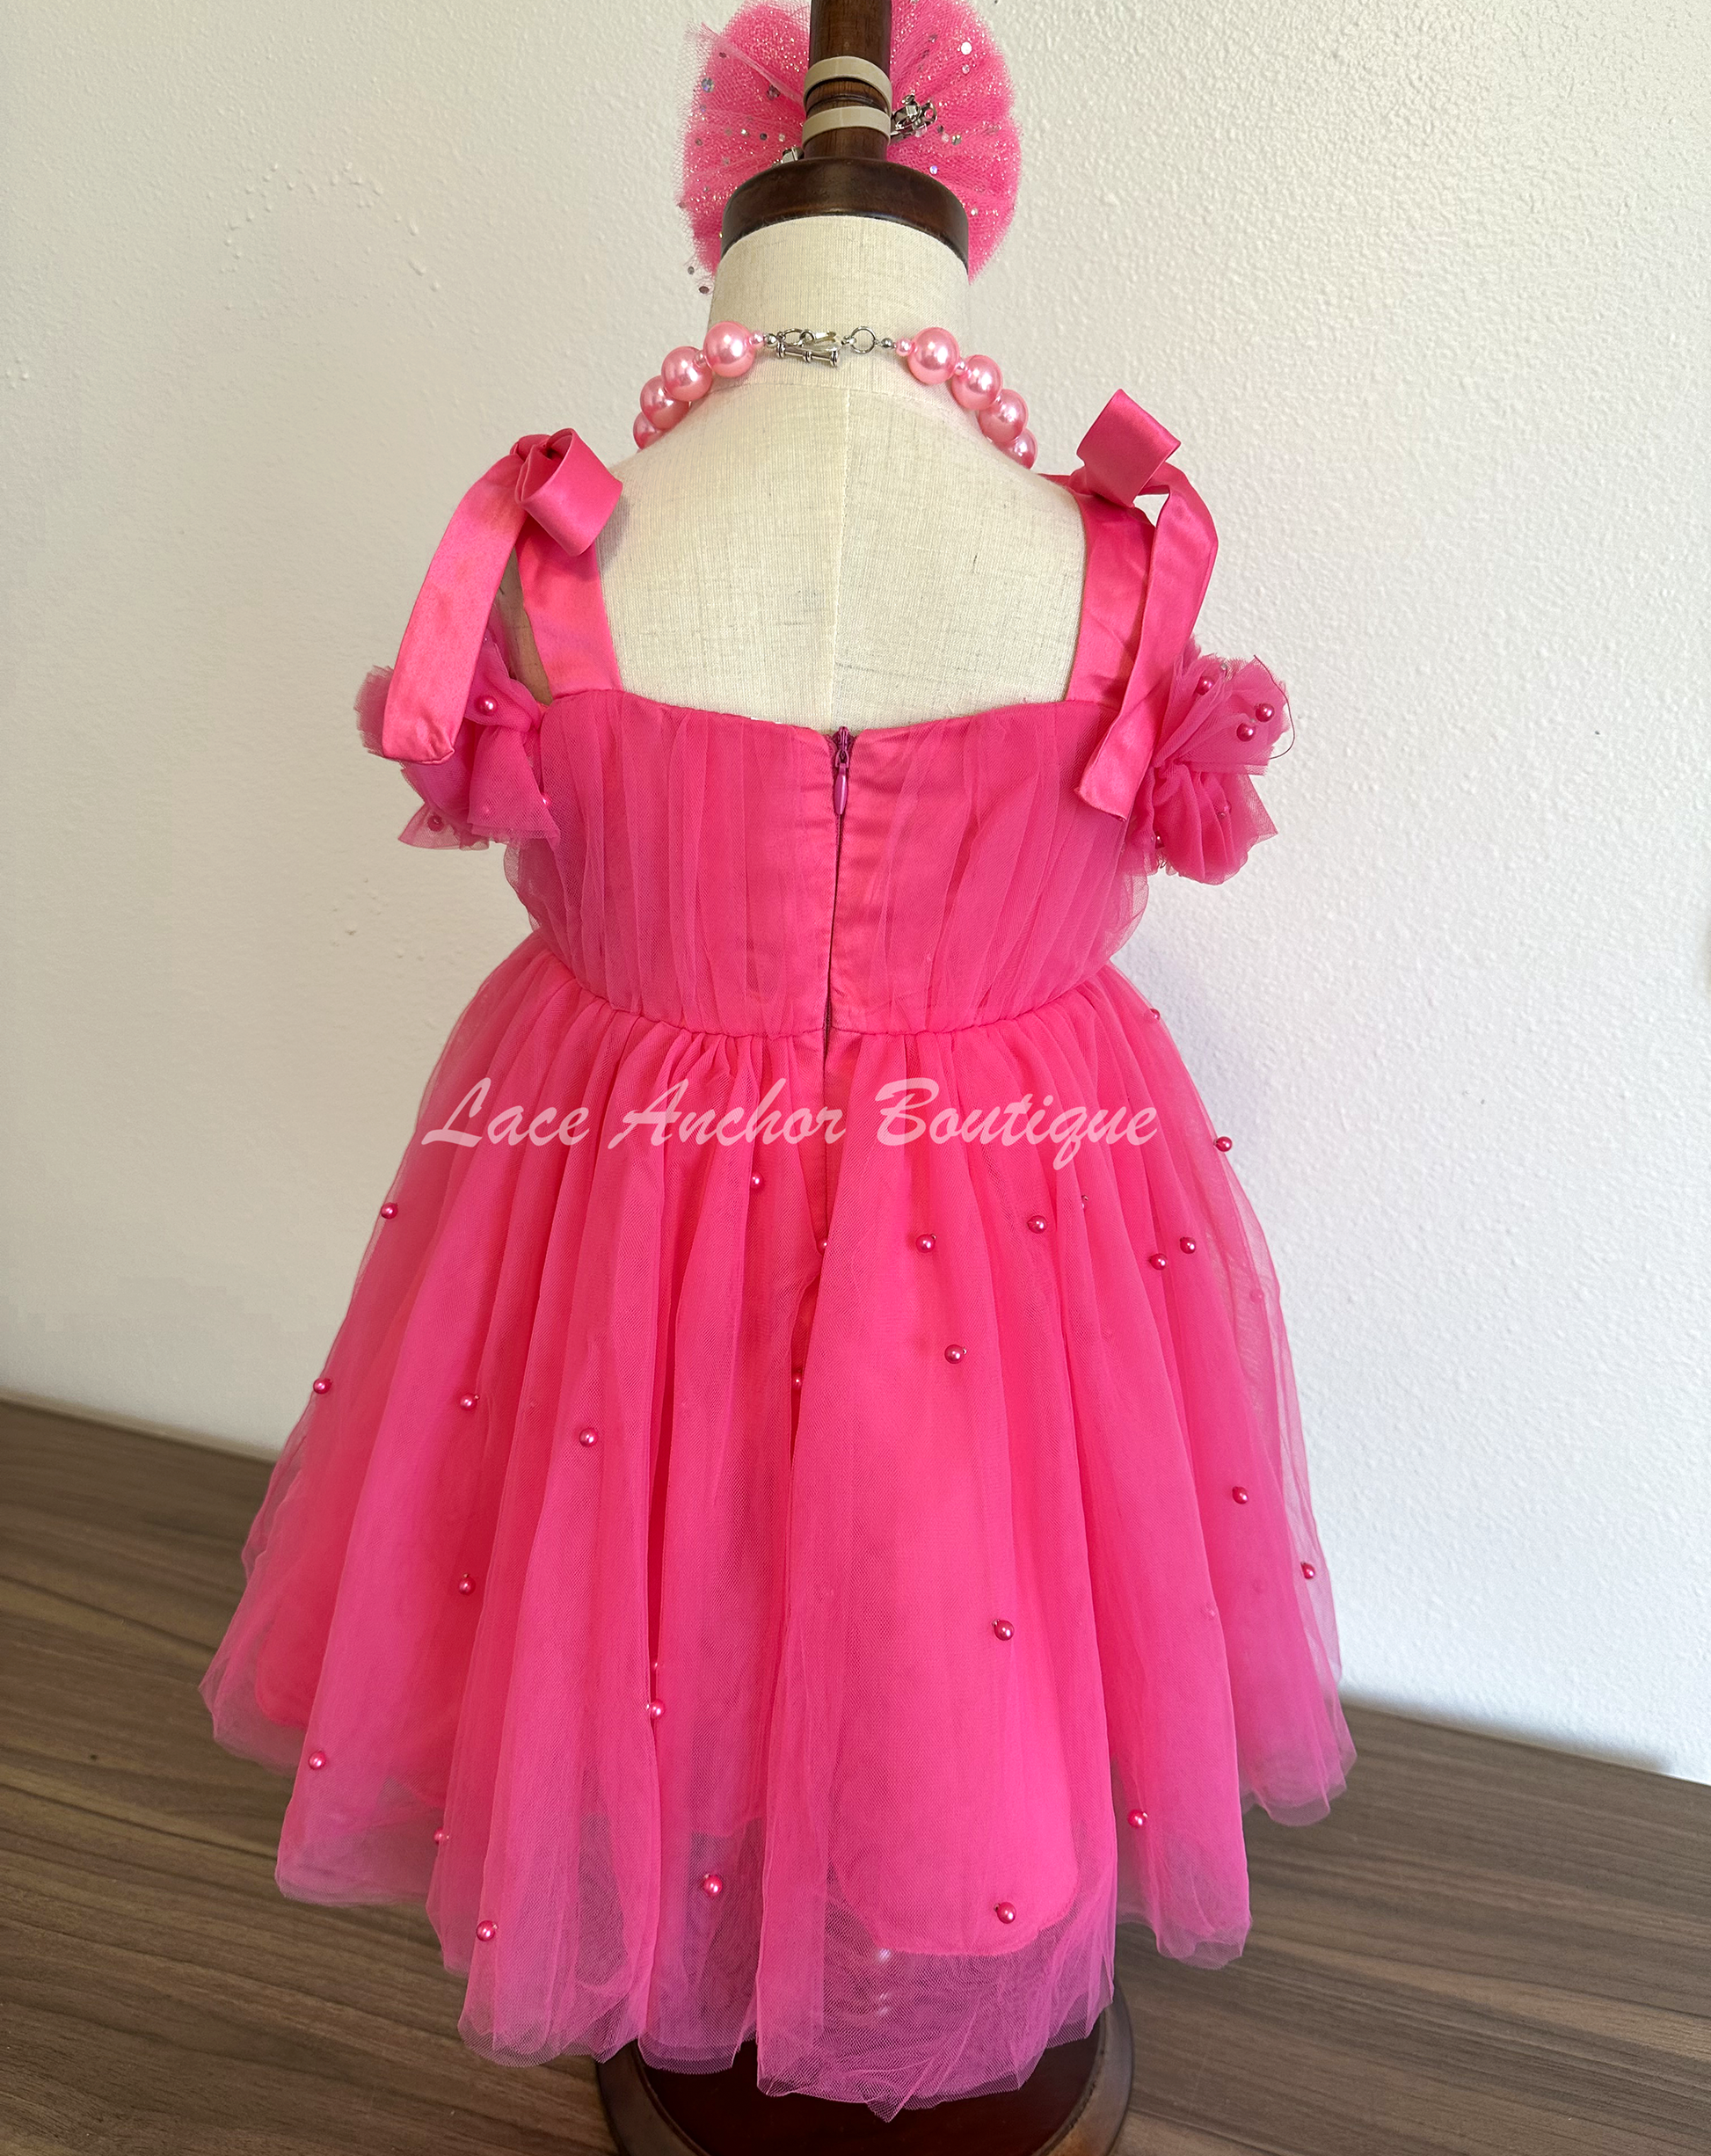 hot pink tulle princess birthday girl dress with pink pearls and bow tied shoulders with ruffled off shoulder sleeves. Baby toddler youth girls tutu party dress.